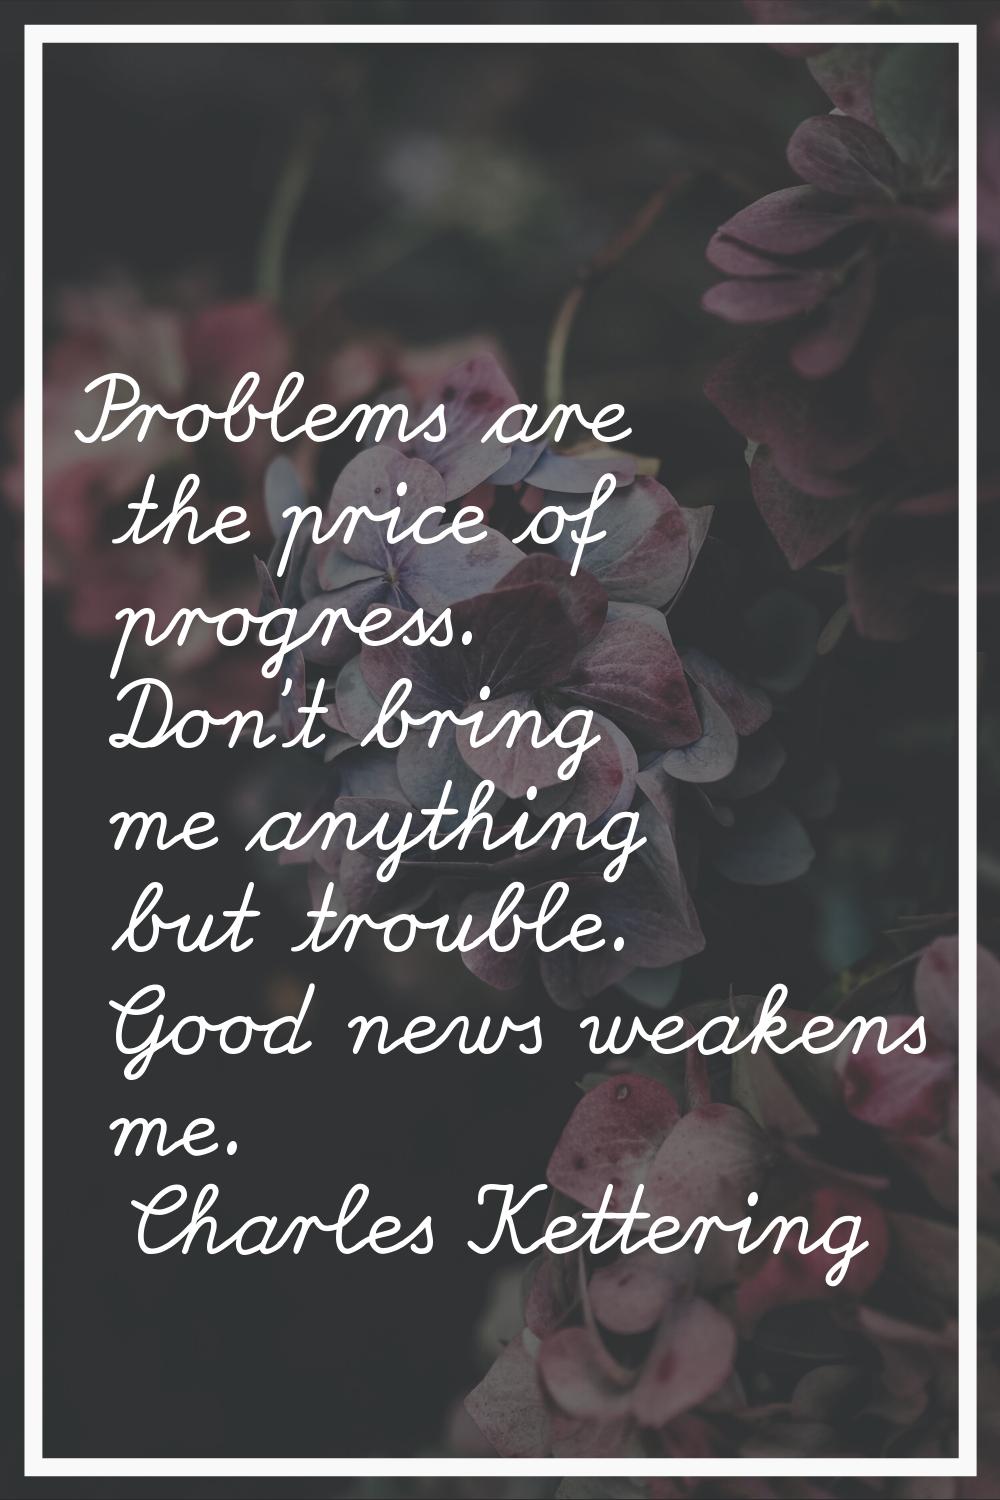 Problems are the price of progress. Don't bring me anything but trouble. Good news weakens me.